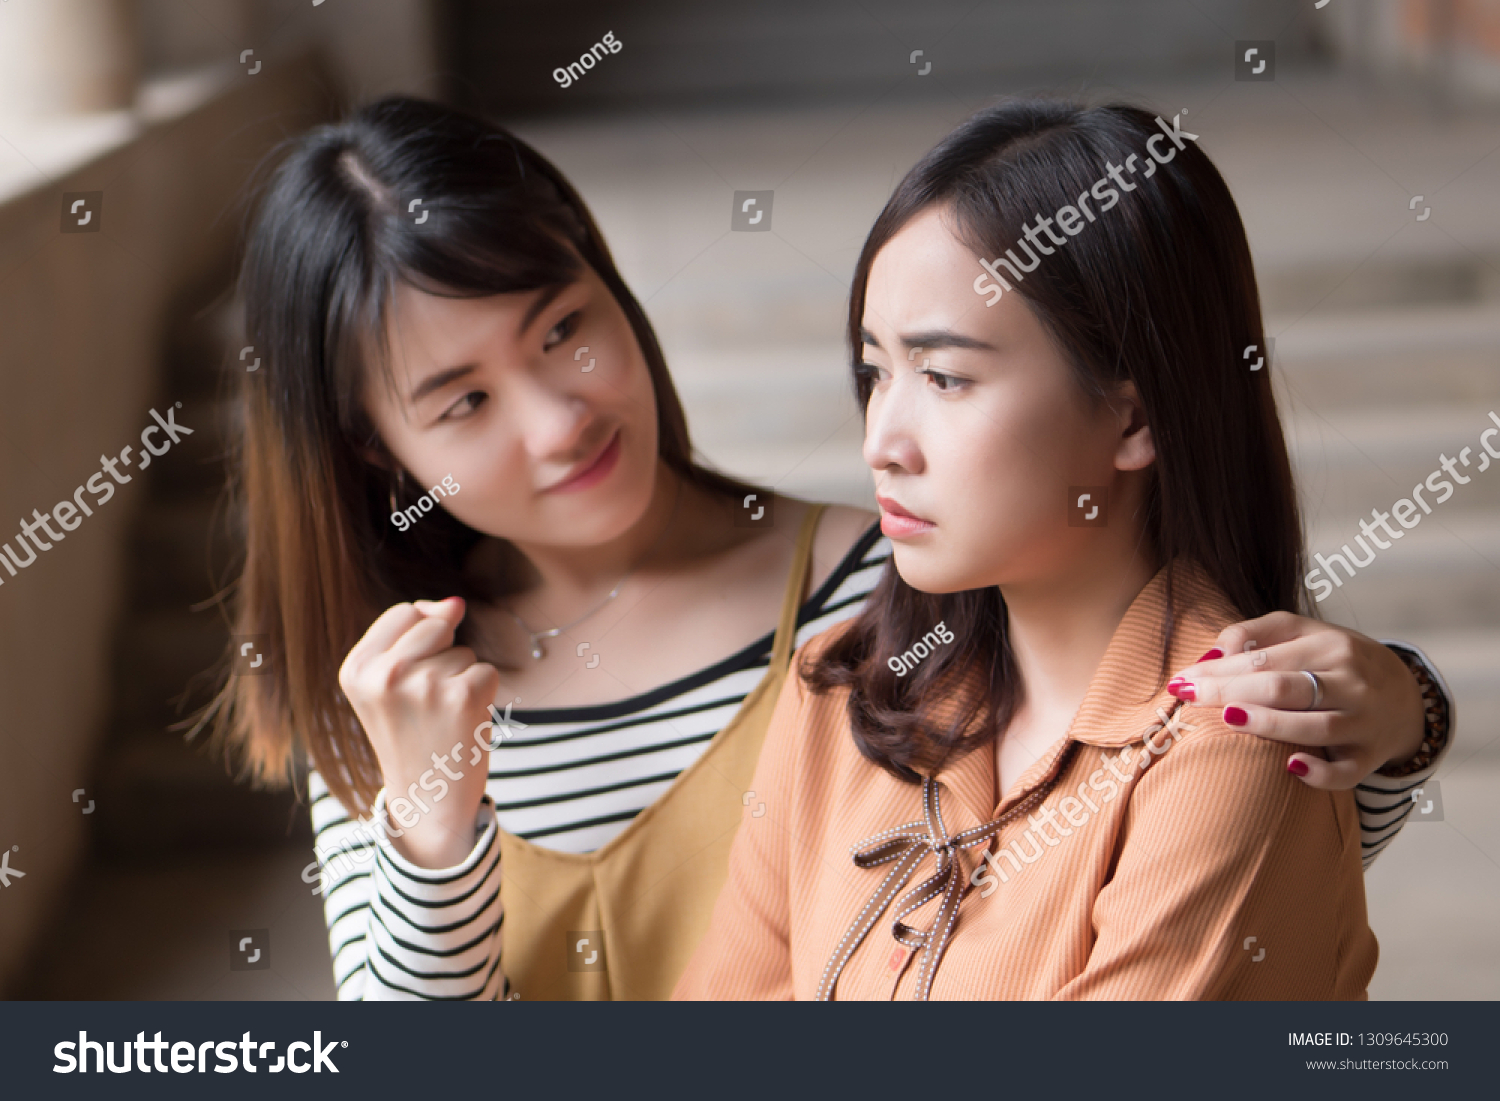 Asian Woman Getting Encoragement Her pic